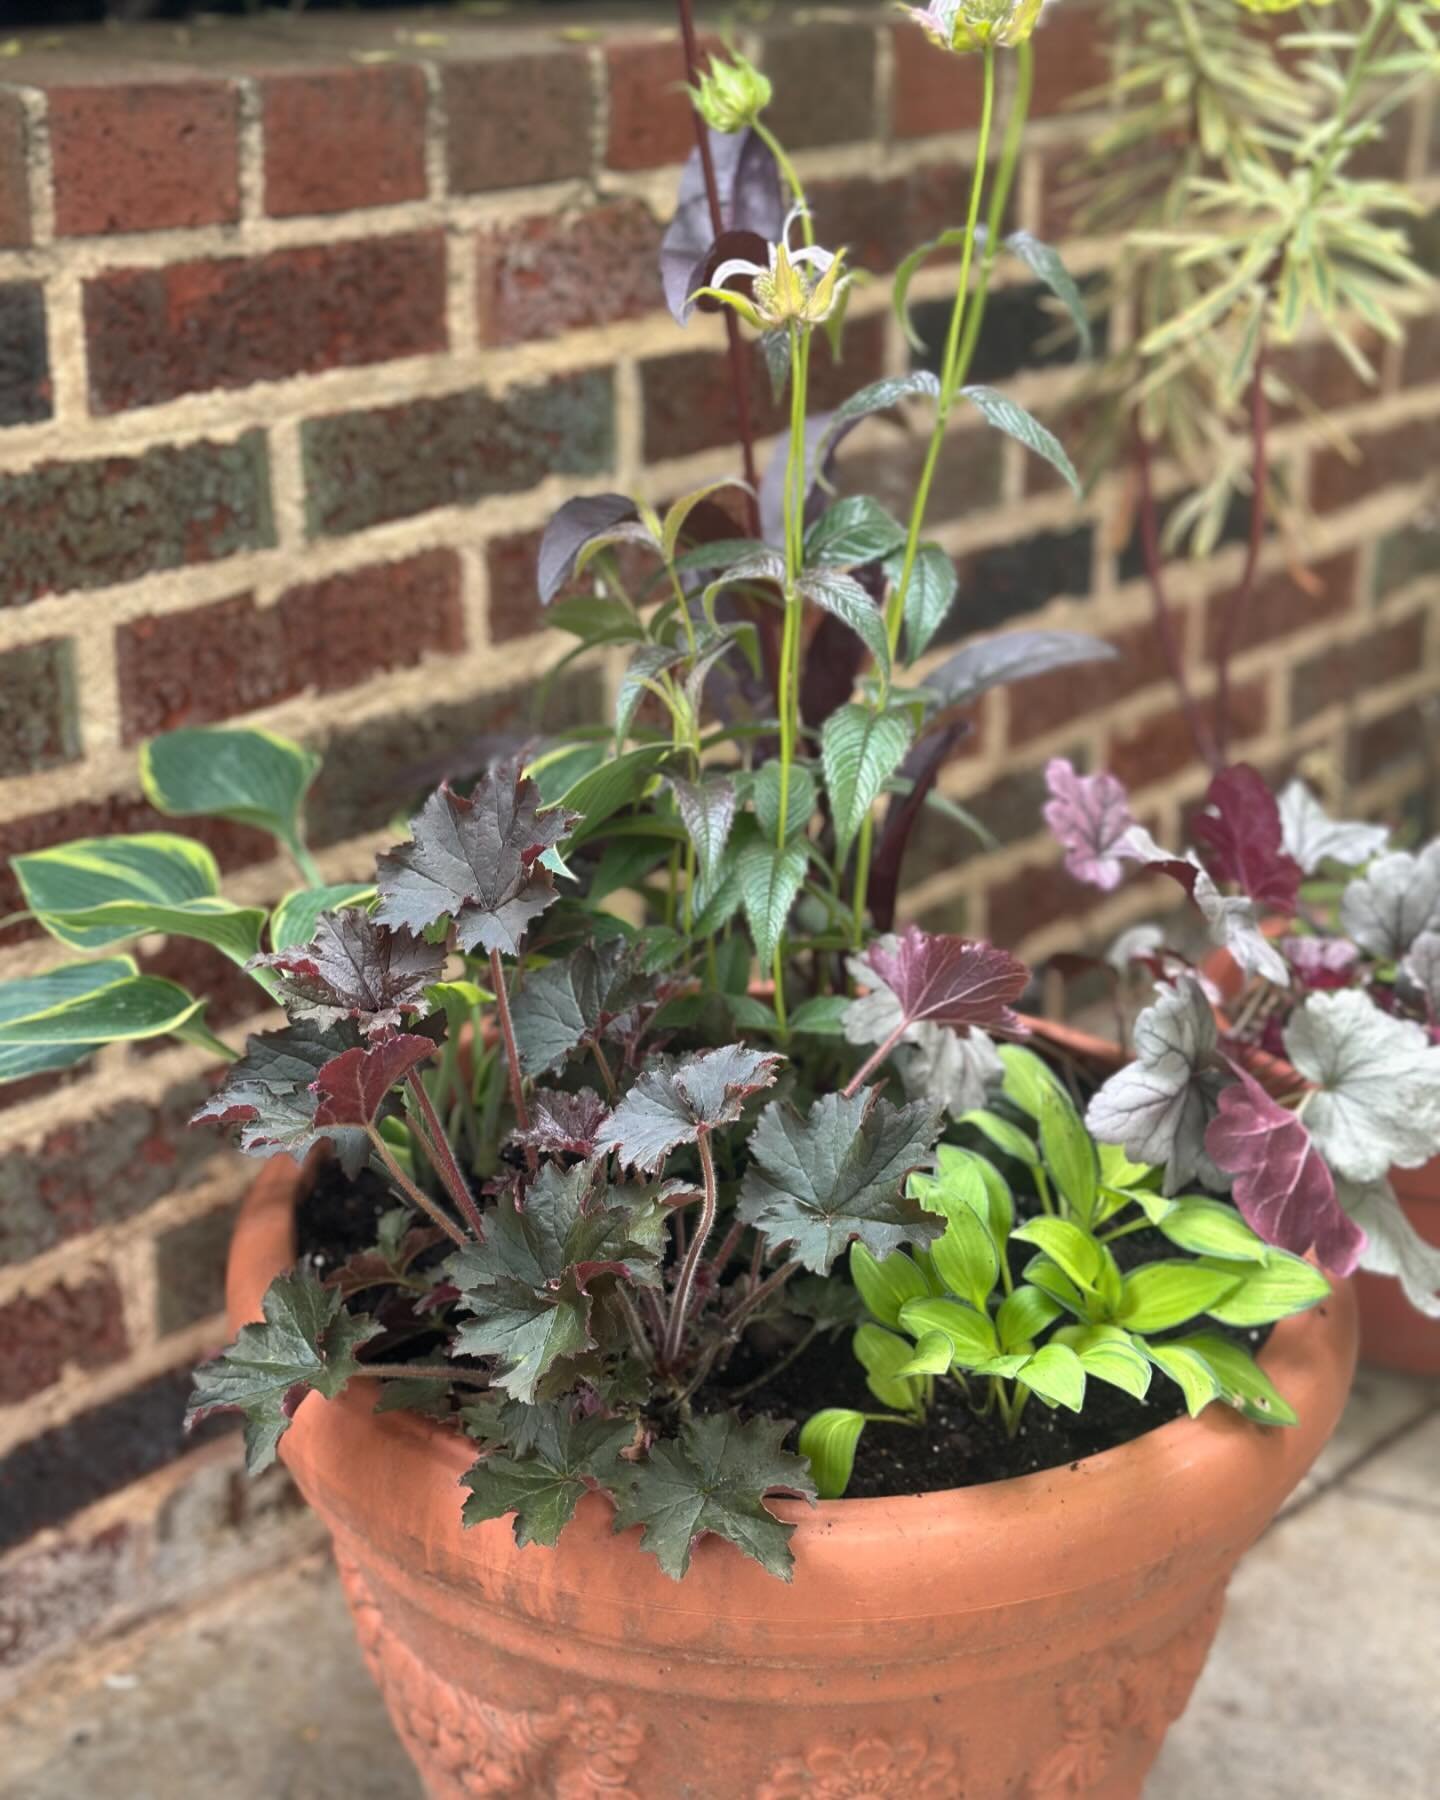 What a delight to plant some containers for a wonderful client this morning! Their garden will be on the @gardenclubcouncil tour next weekend, I highly encourage you all to buy tickets, this garden is absolutely magical. 🎟️ https://shop.gardenclubco